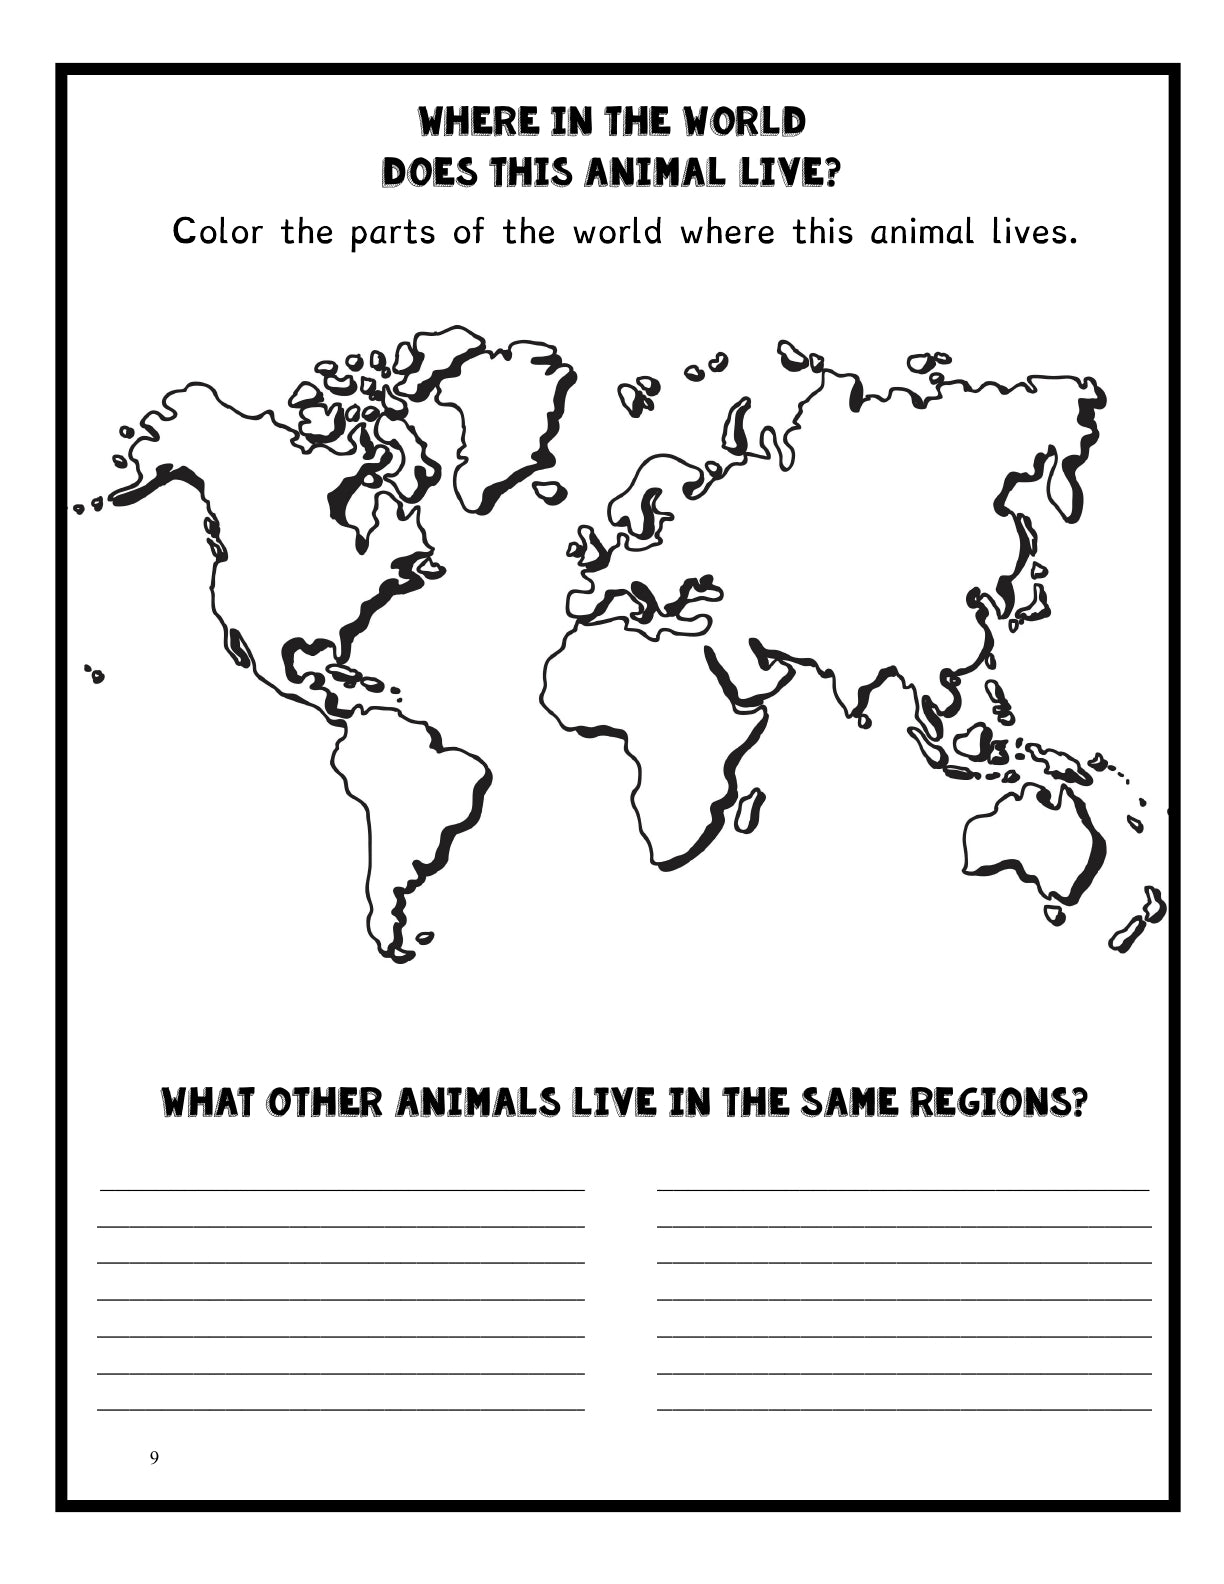 (Age 10+) All About Endangered Species - Science & Research Study Guide